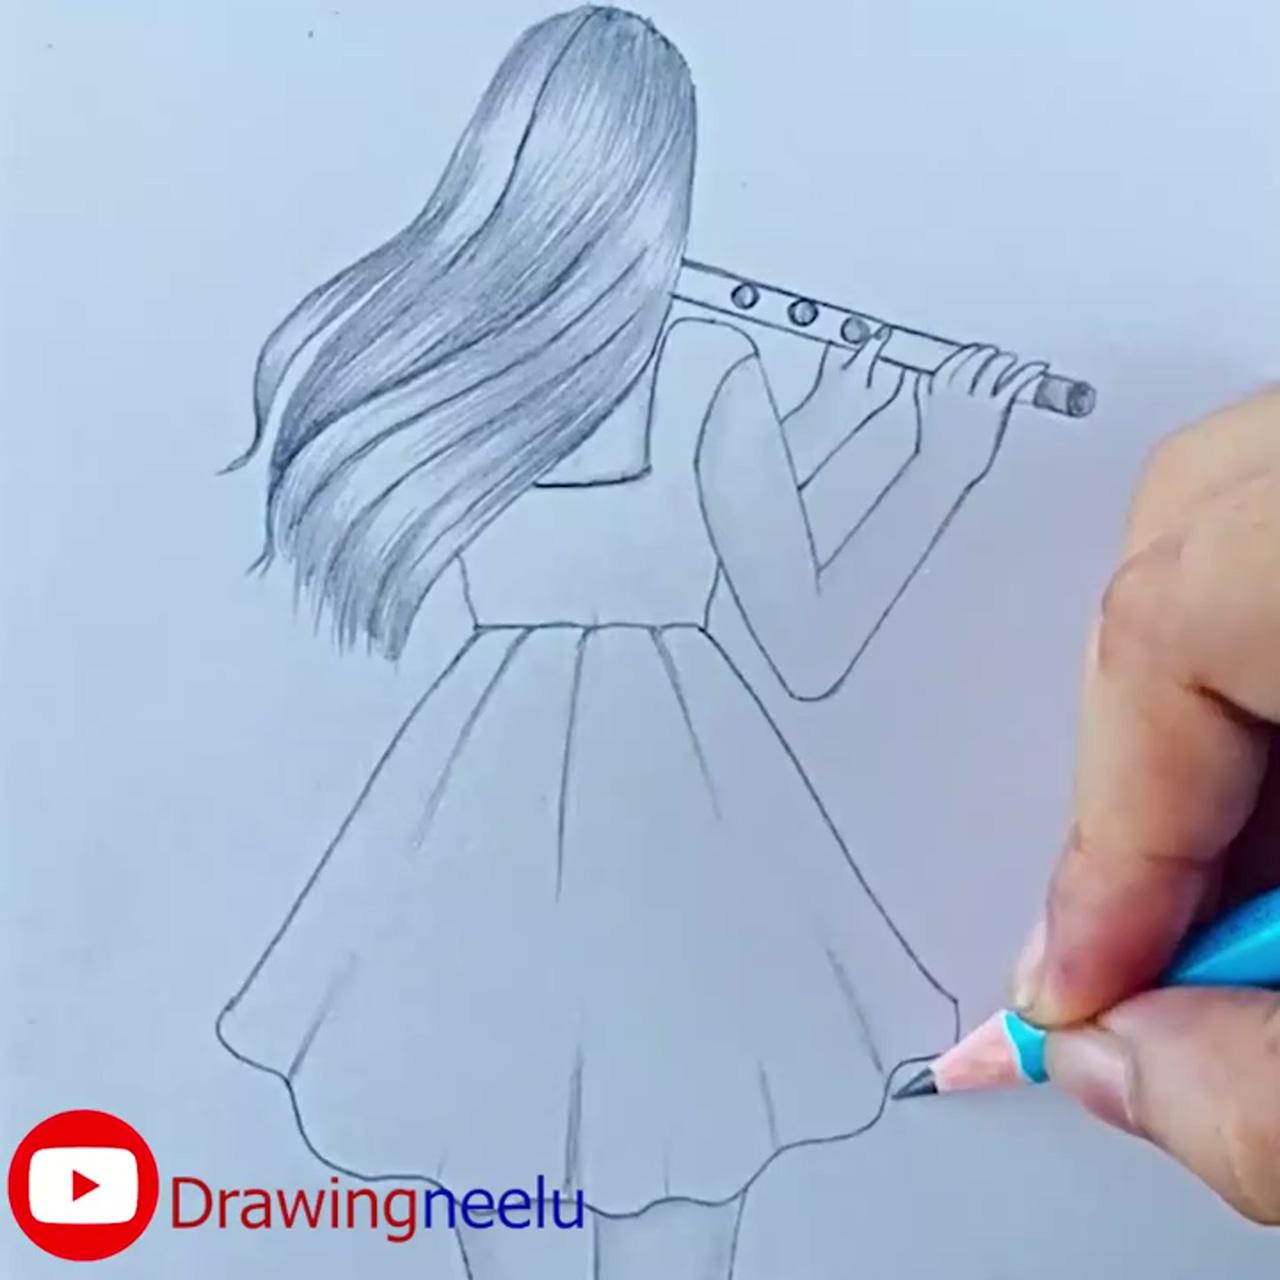 How to draw a girl plays the flute, step by step beginner drawing, easy pencil drawing tutorial | easy drawing beautiful dress backside, pencil sketch for beginner, simple drawing tutorial